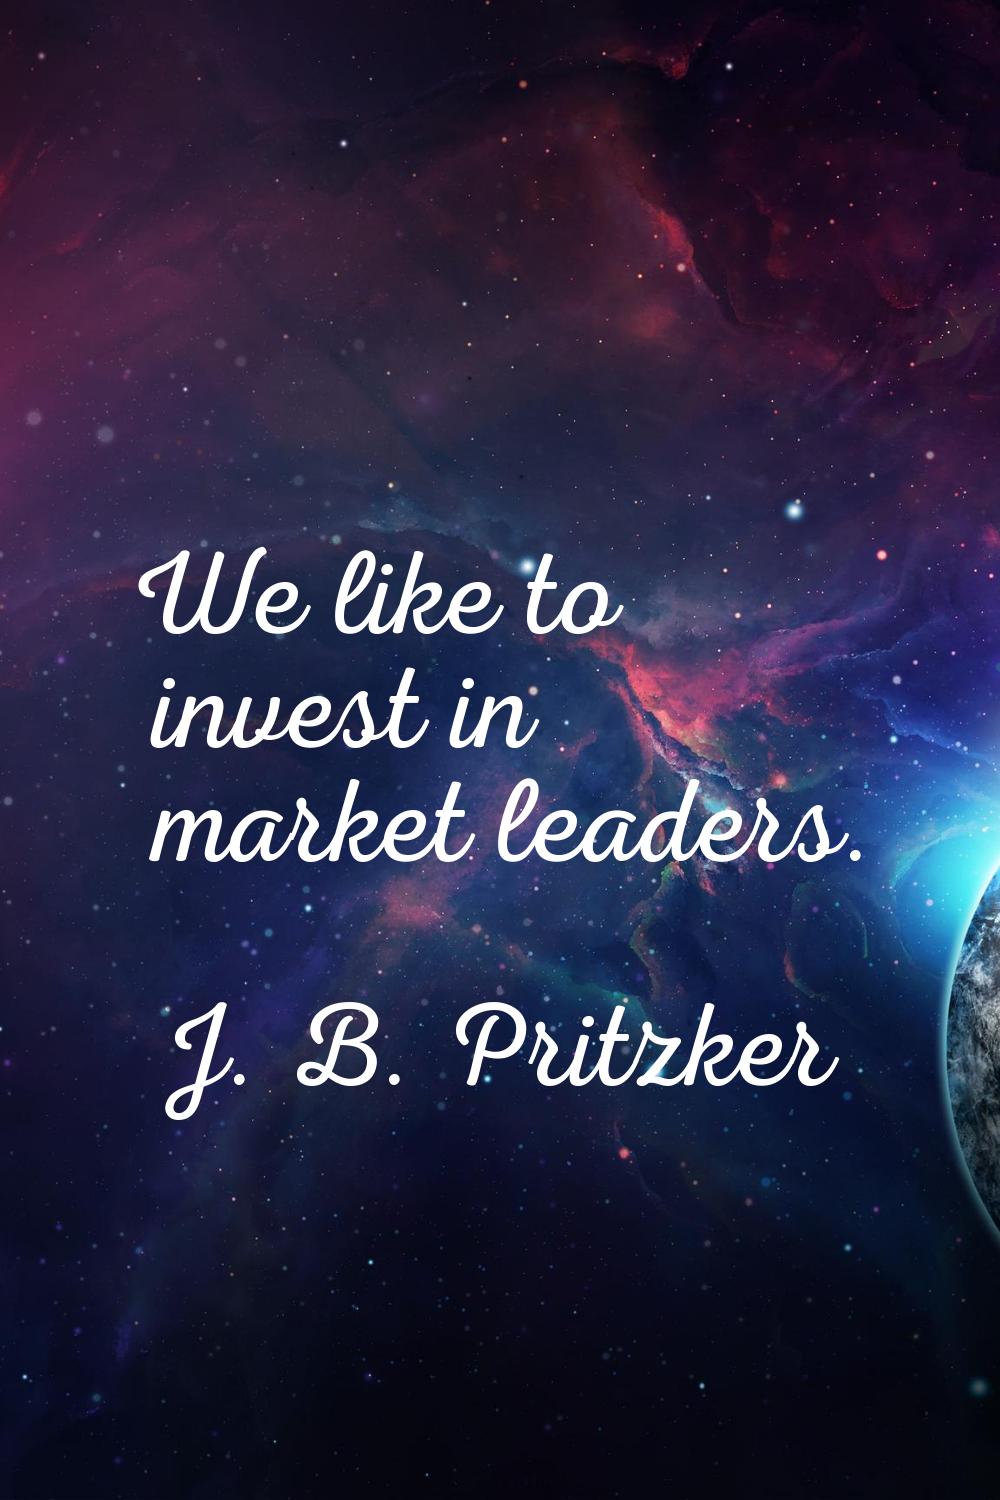 We like to invest in market leaders.